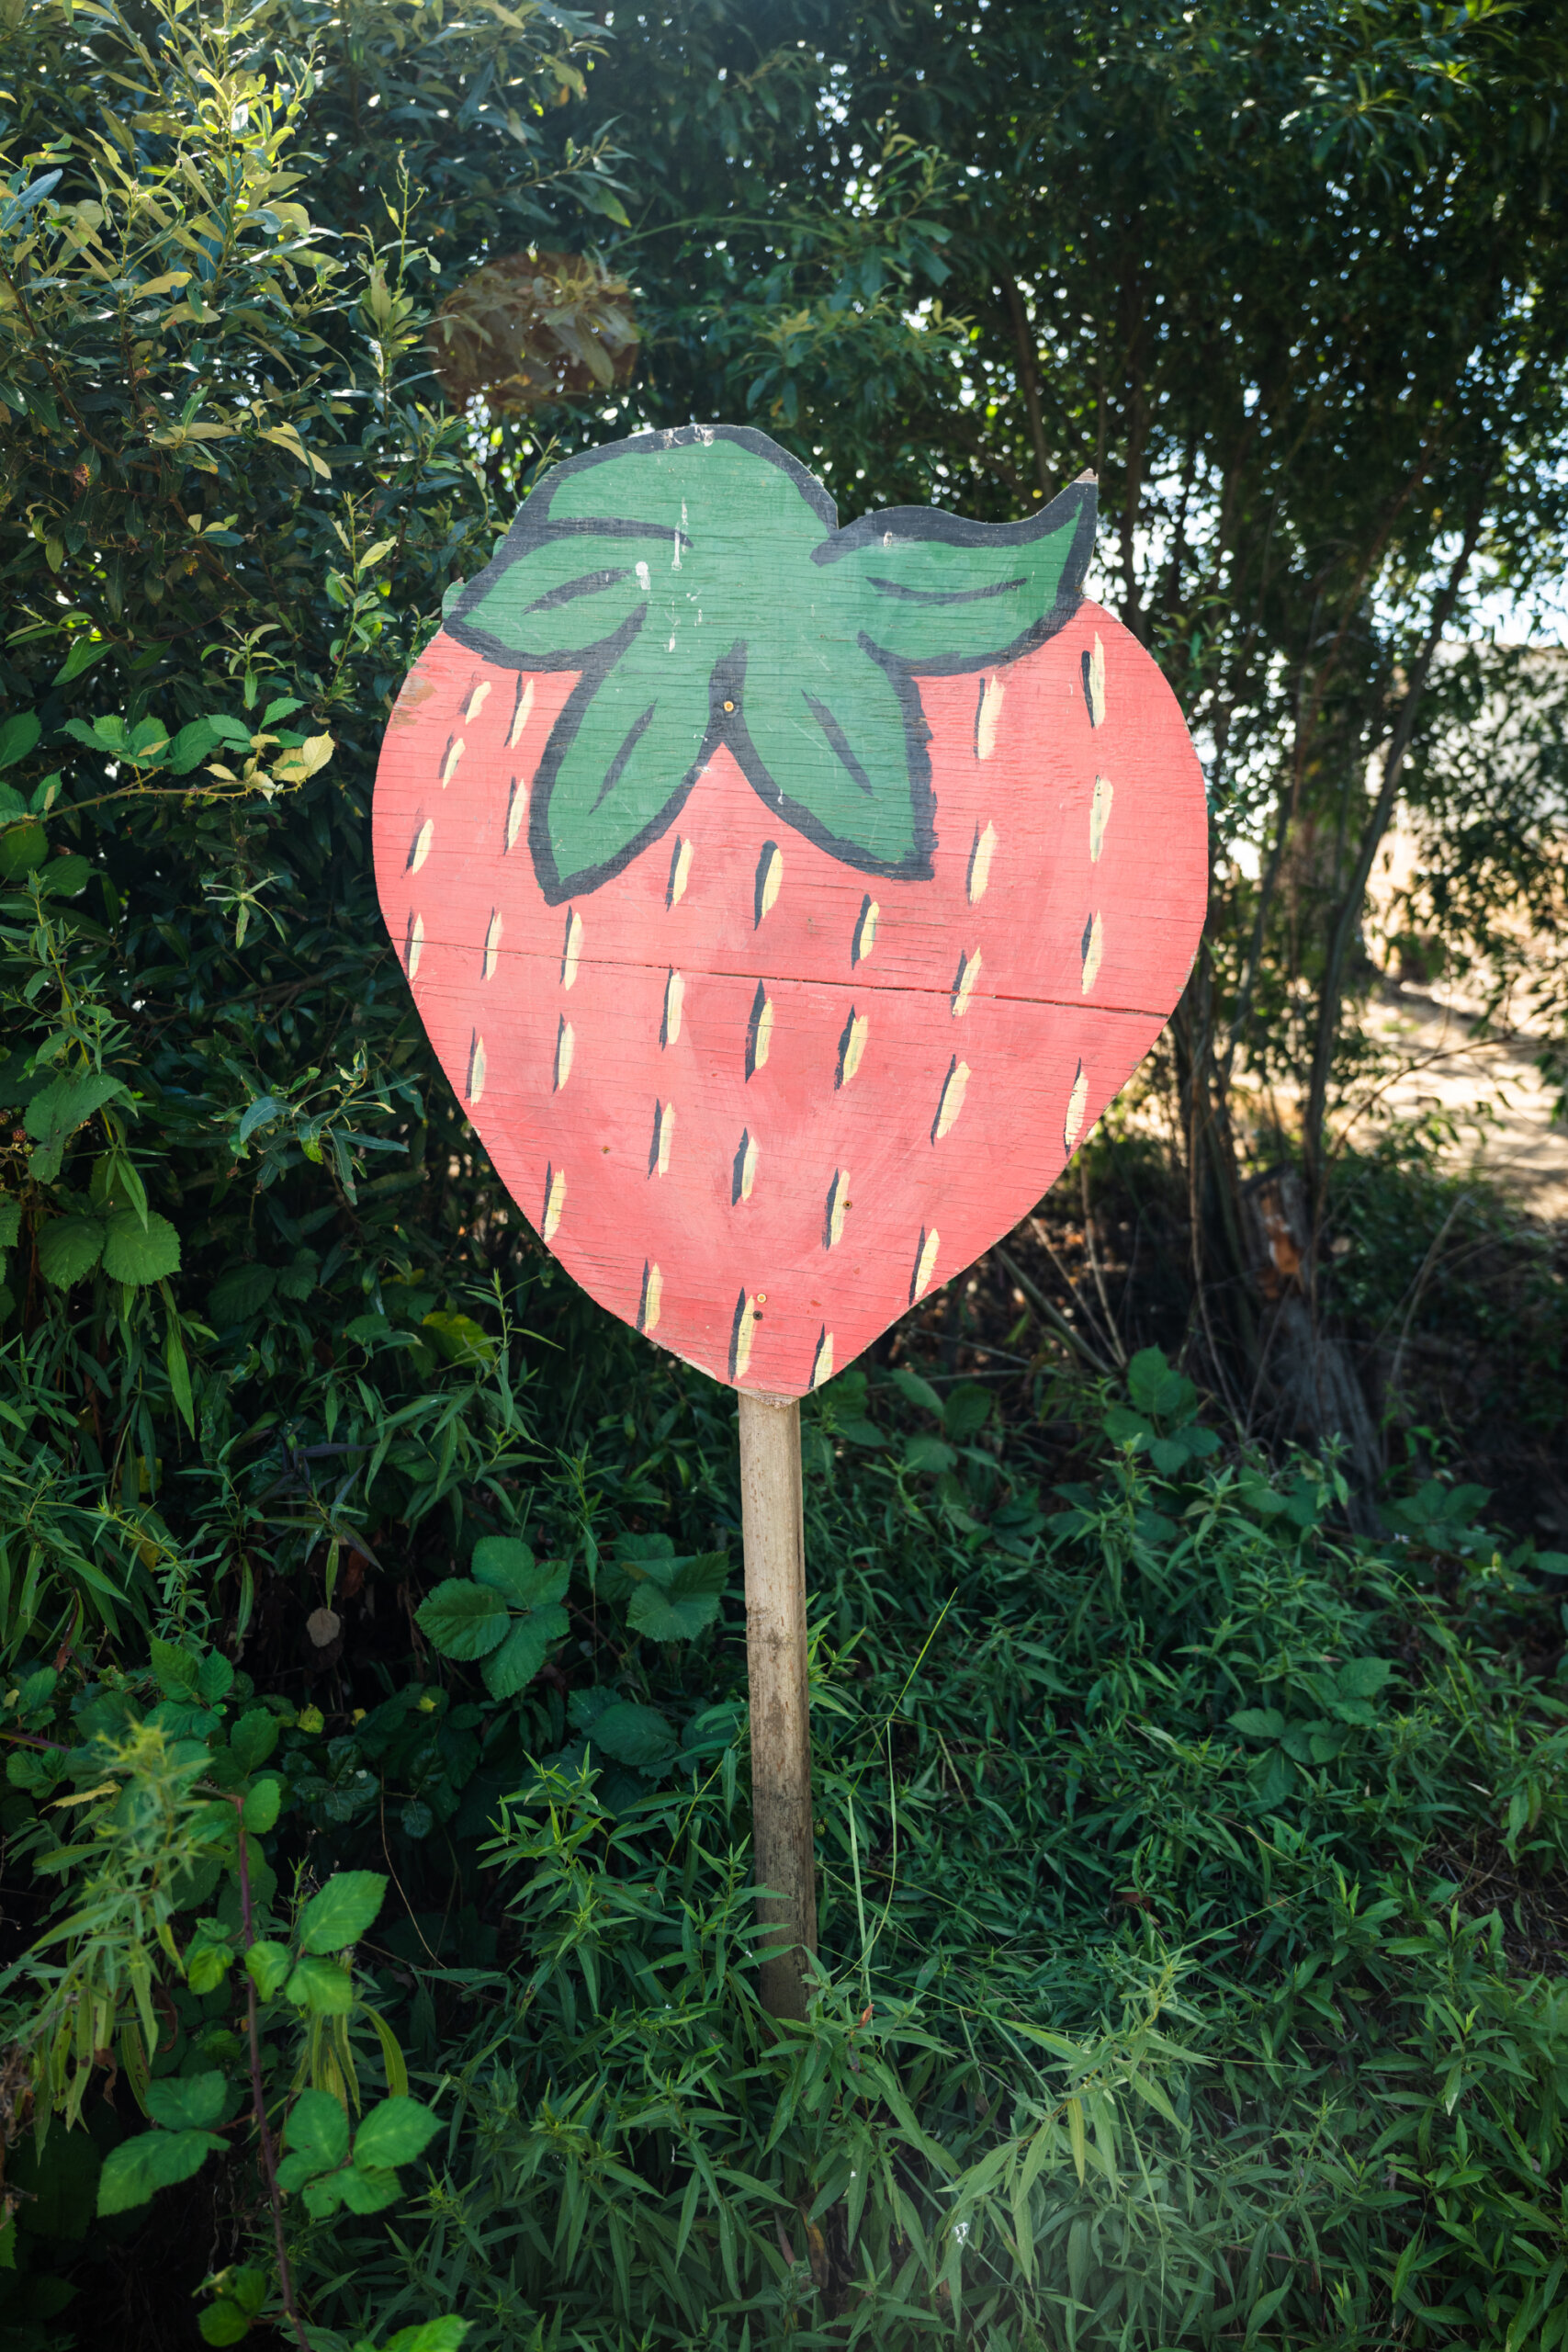 An illustrated strawberry sign greets visitors at Gizdich Ranch's u-pick field